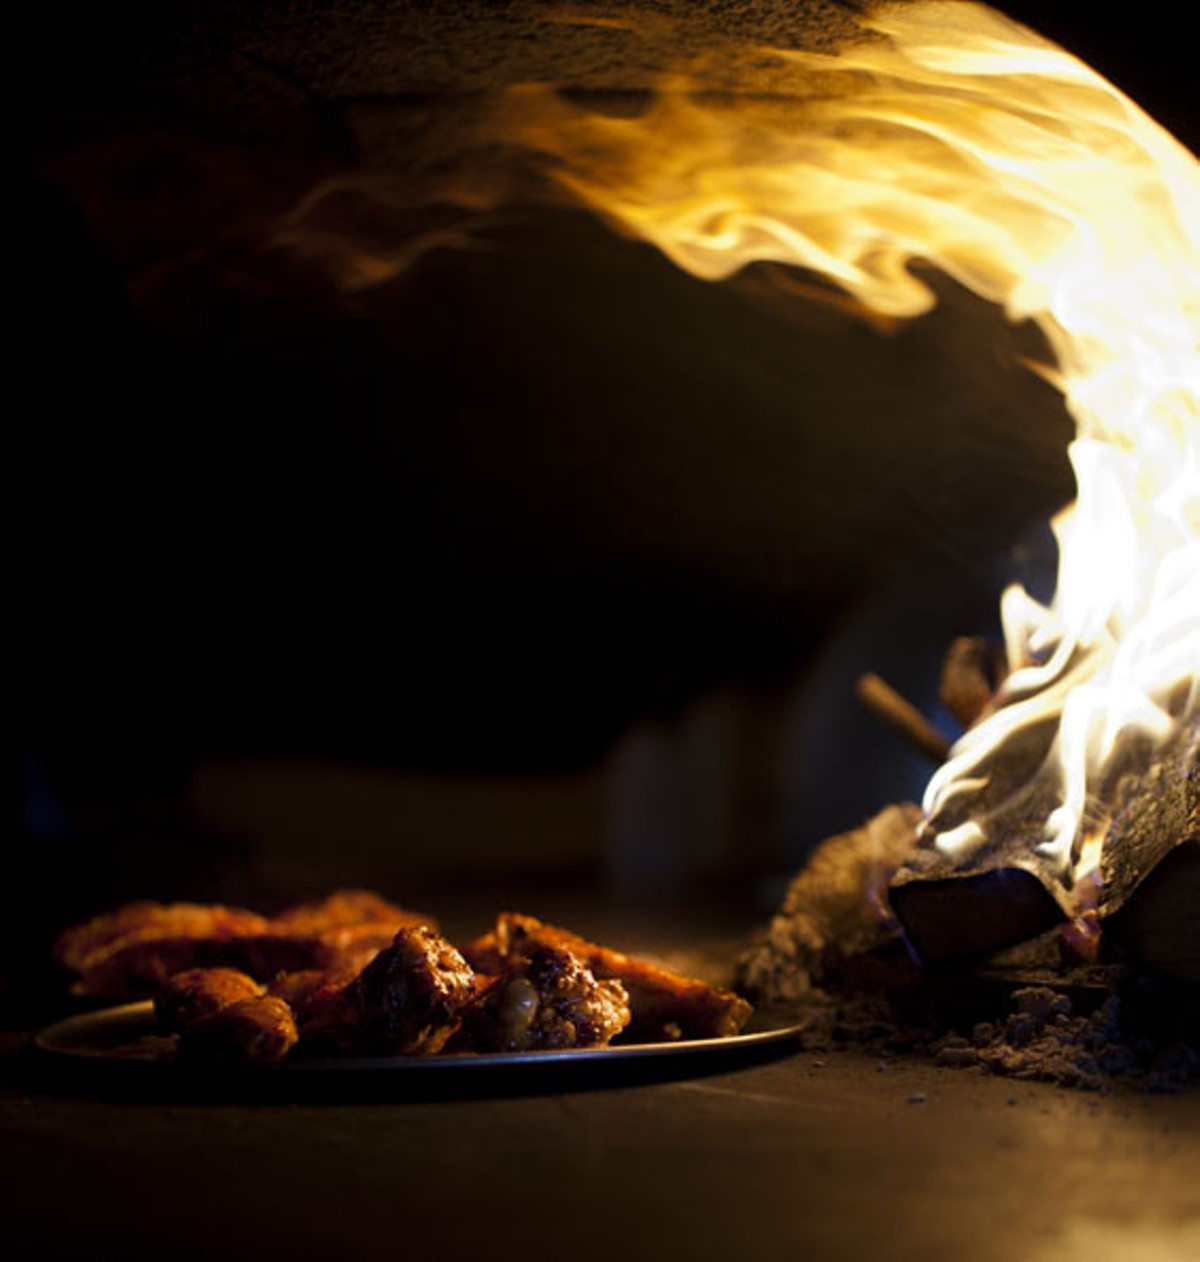 twinOak Wood Fired Fare has a state-of-the-art brick oven. So how's the pizza?